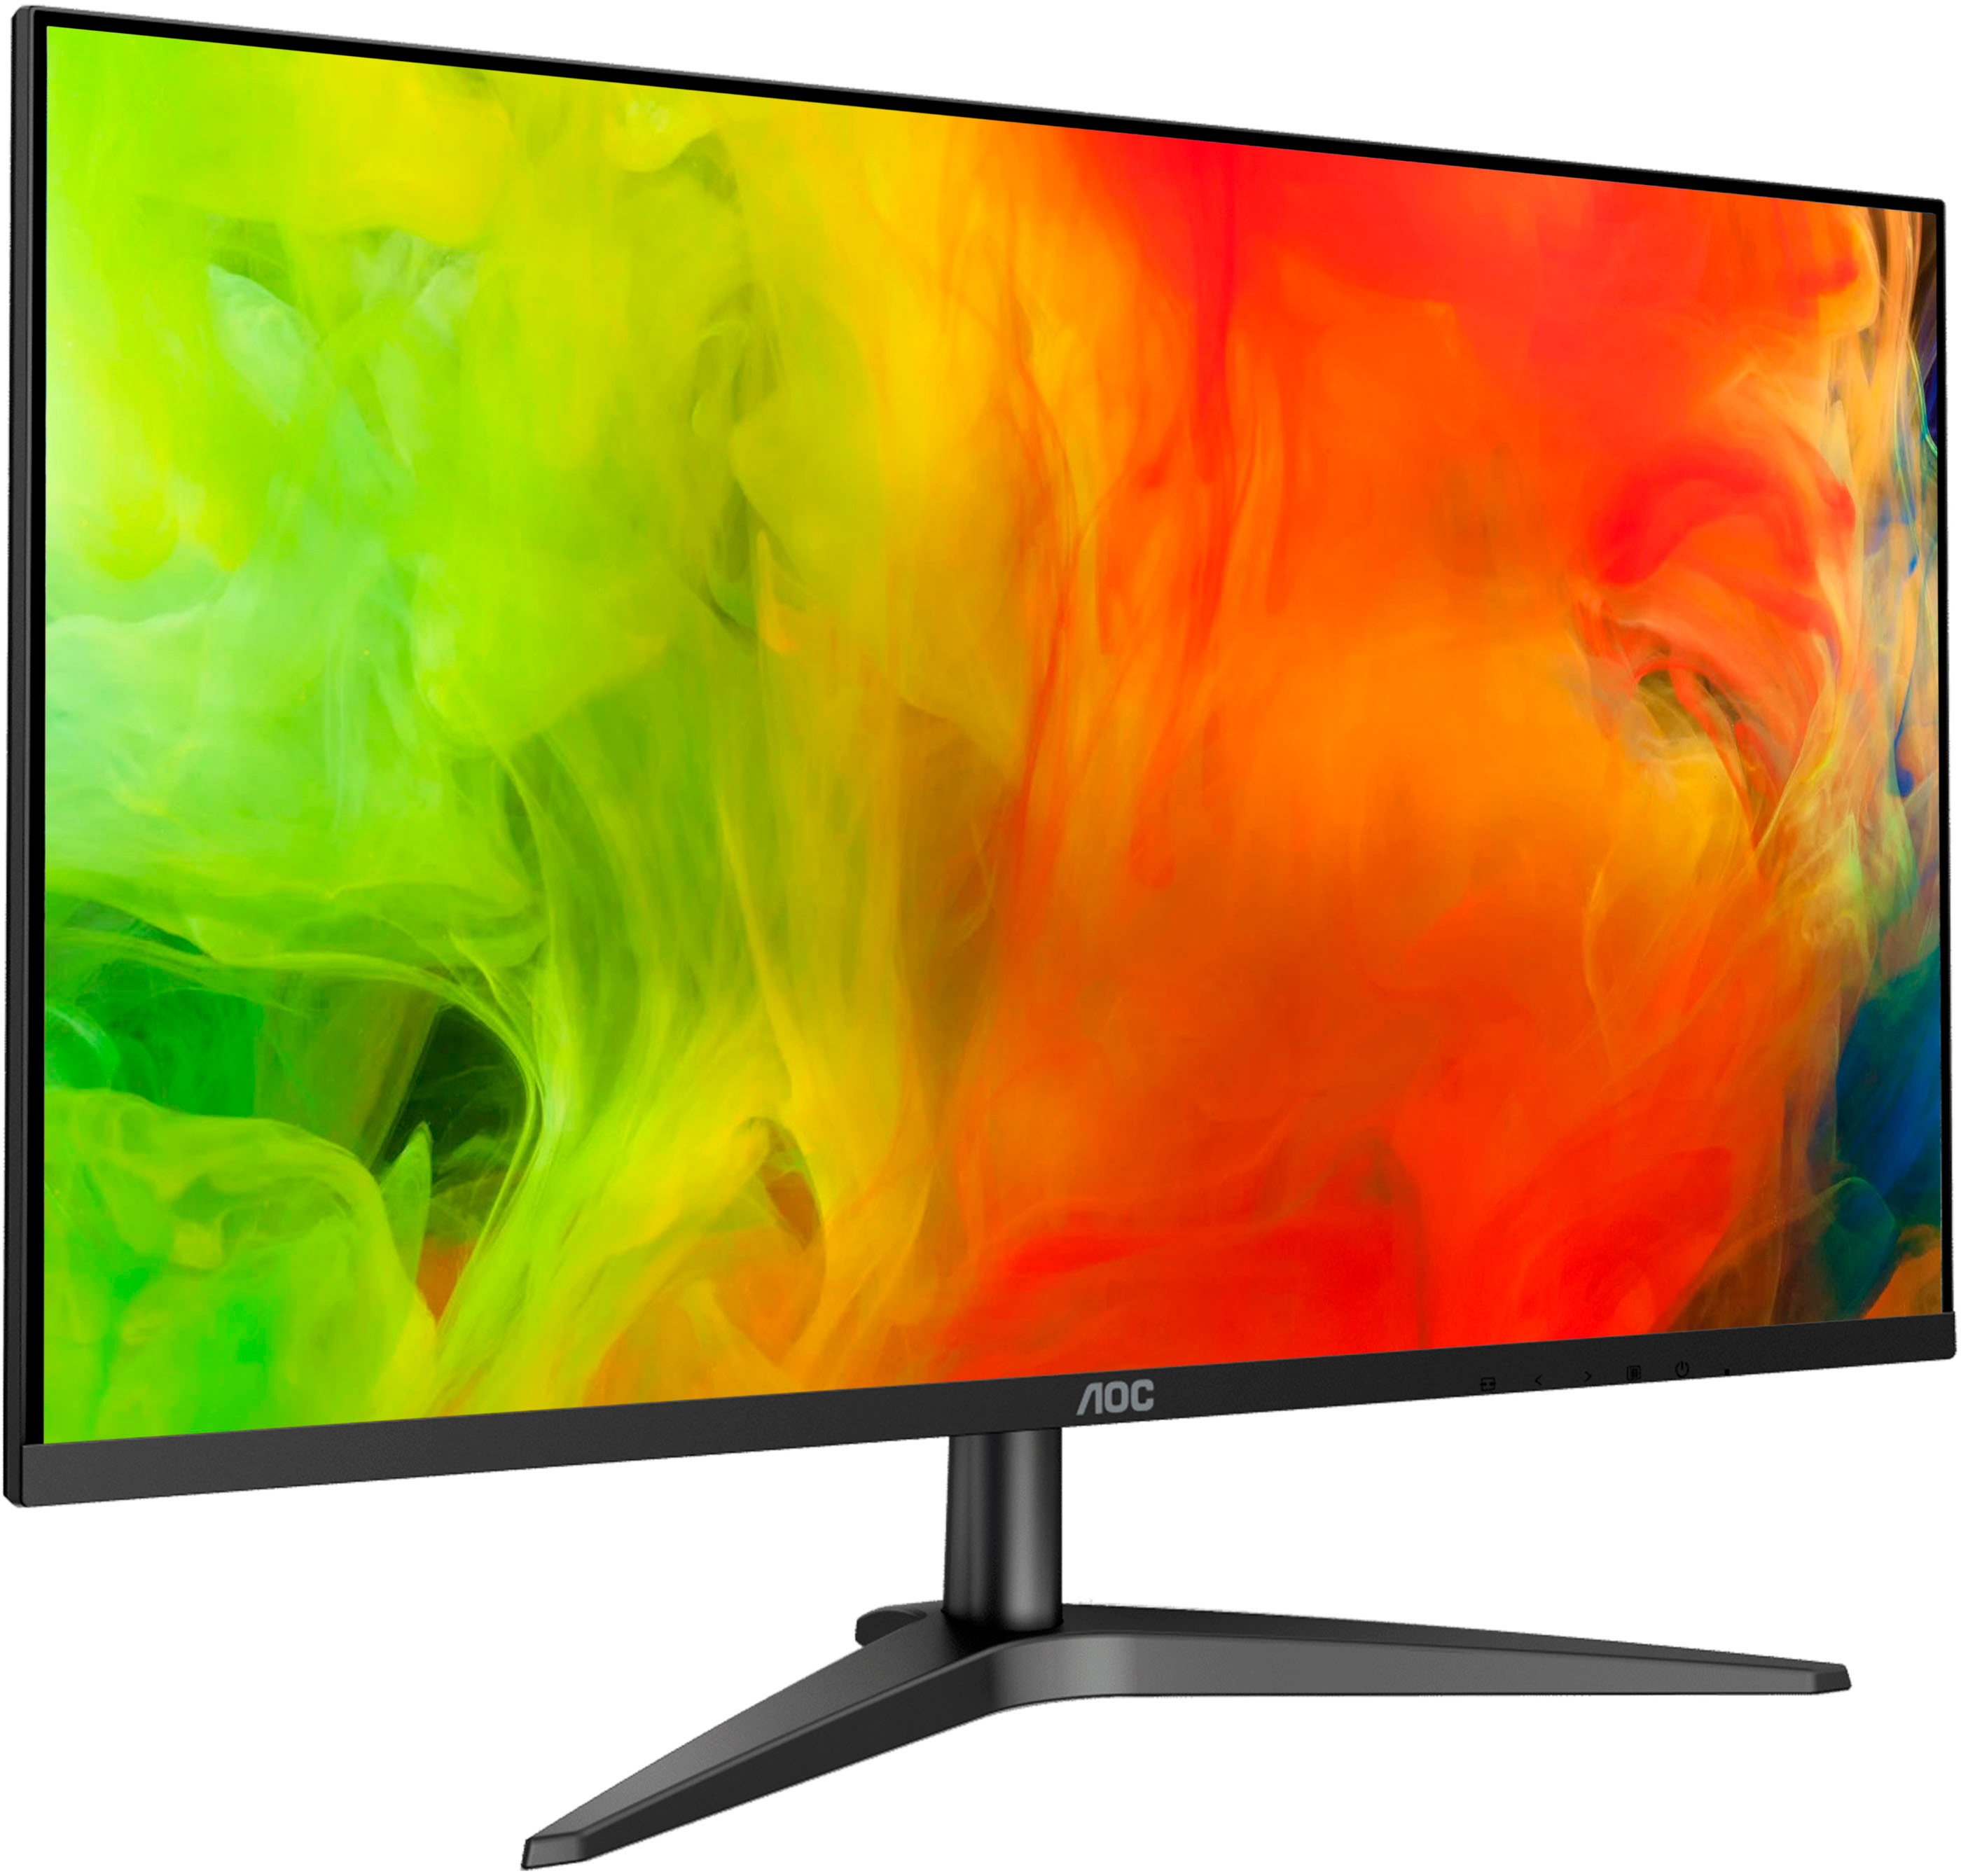 Angle View: Samsung - 24" LED FHD AMD FreeSync Monitor with bezel-less design (HDMI, D-sub) - Black